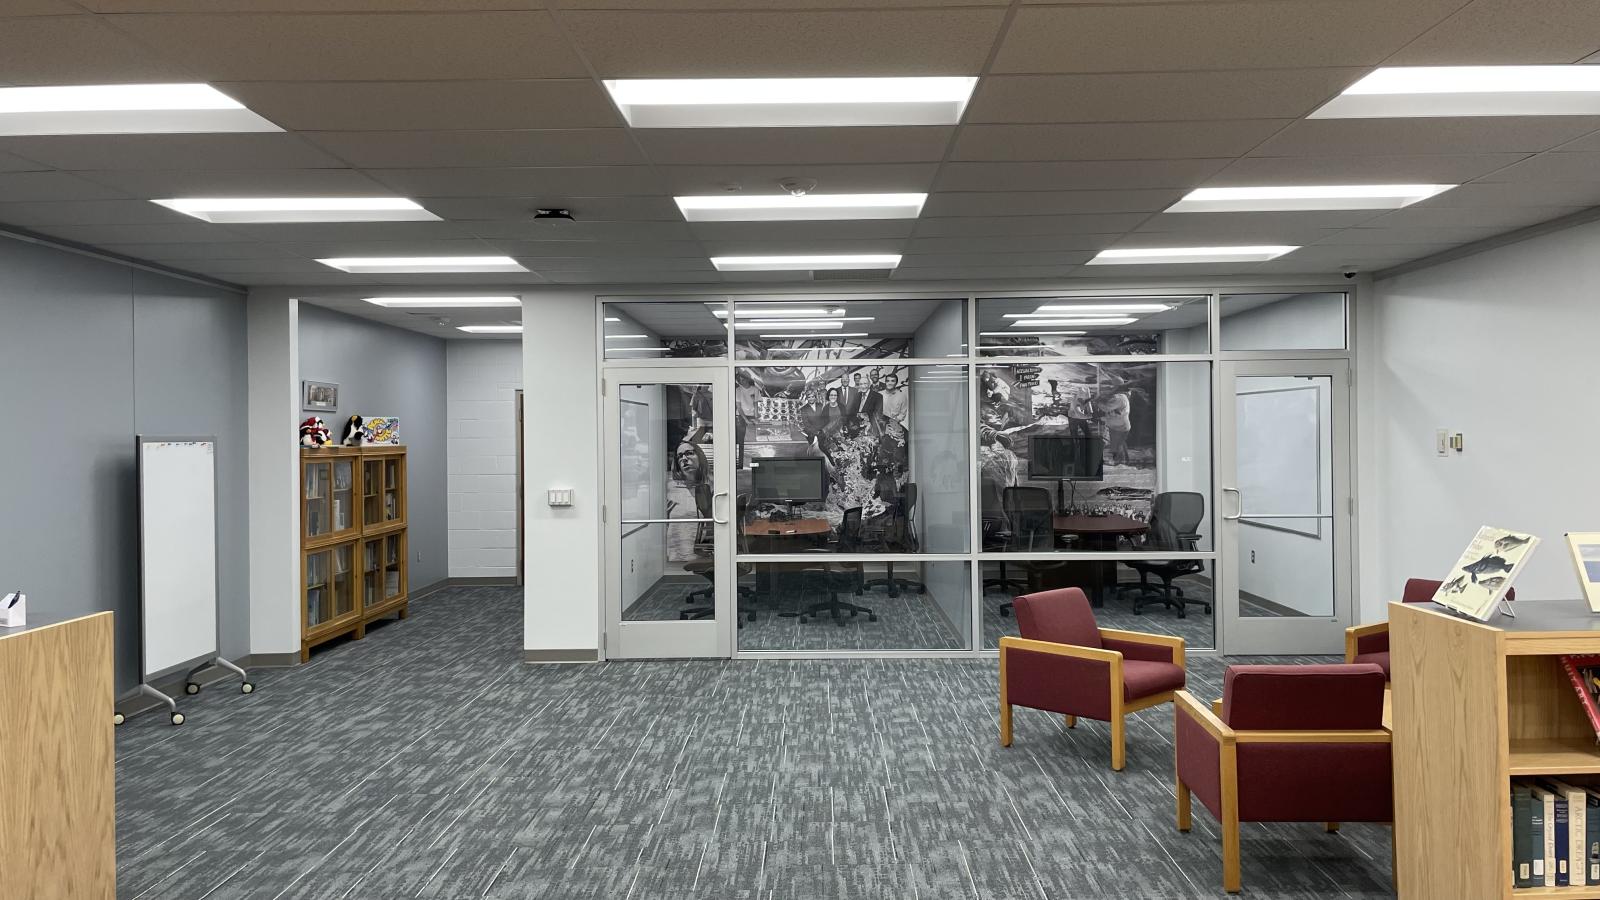 image taken from inside the Goldthwait Polar Library in the far back 2 glass enclosed quiet rooms  with a wall length vinyl drape of images on the back wall with some chairs and desk inside and gray carpet, white walls and a light wood table and 2 lounge chairs with red fabric in foreground on bottom right  and book shelve and white portable erase board on left side and white tile drop ceilings with with squares and come containing florescent light fixtures